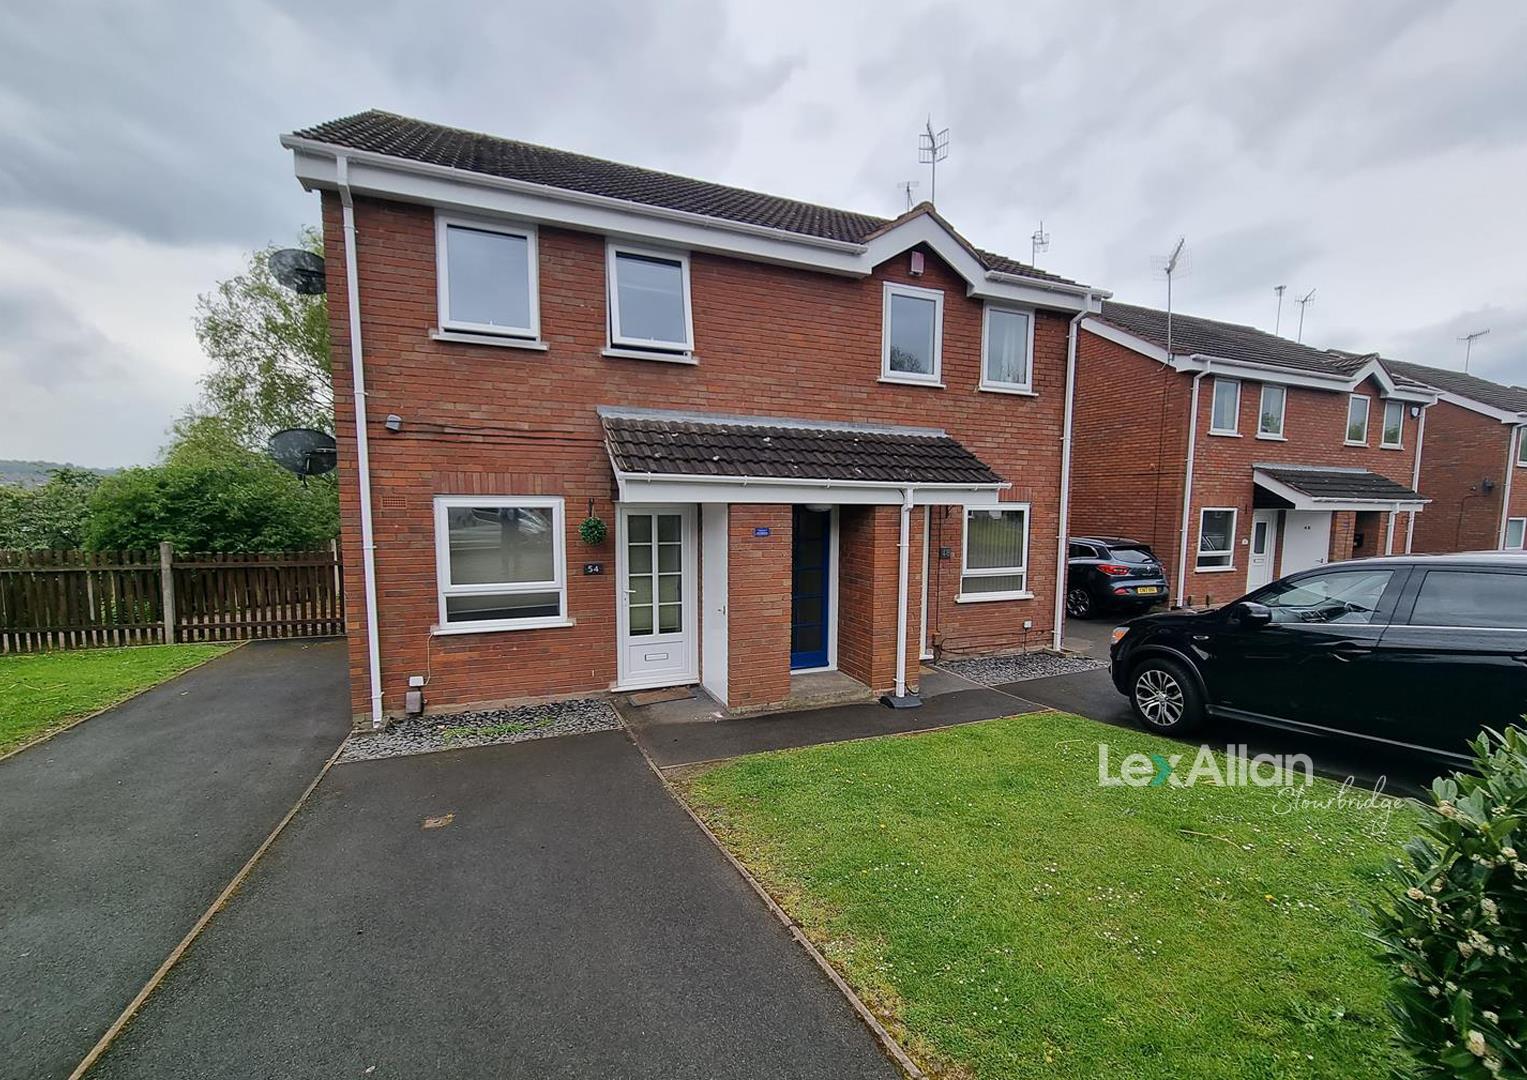 1 bed  for sale in Hern Road, Brierley Hill, DY5 